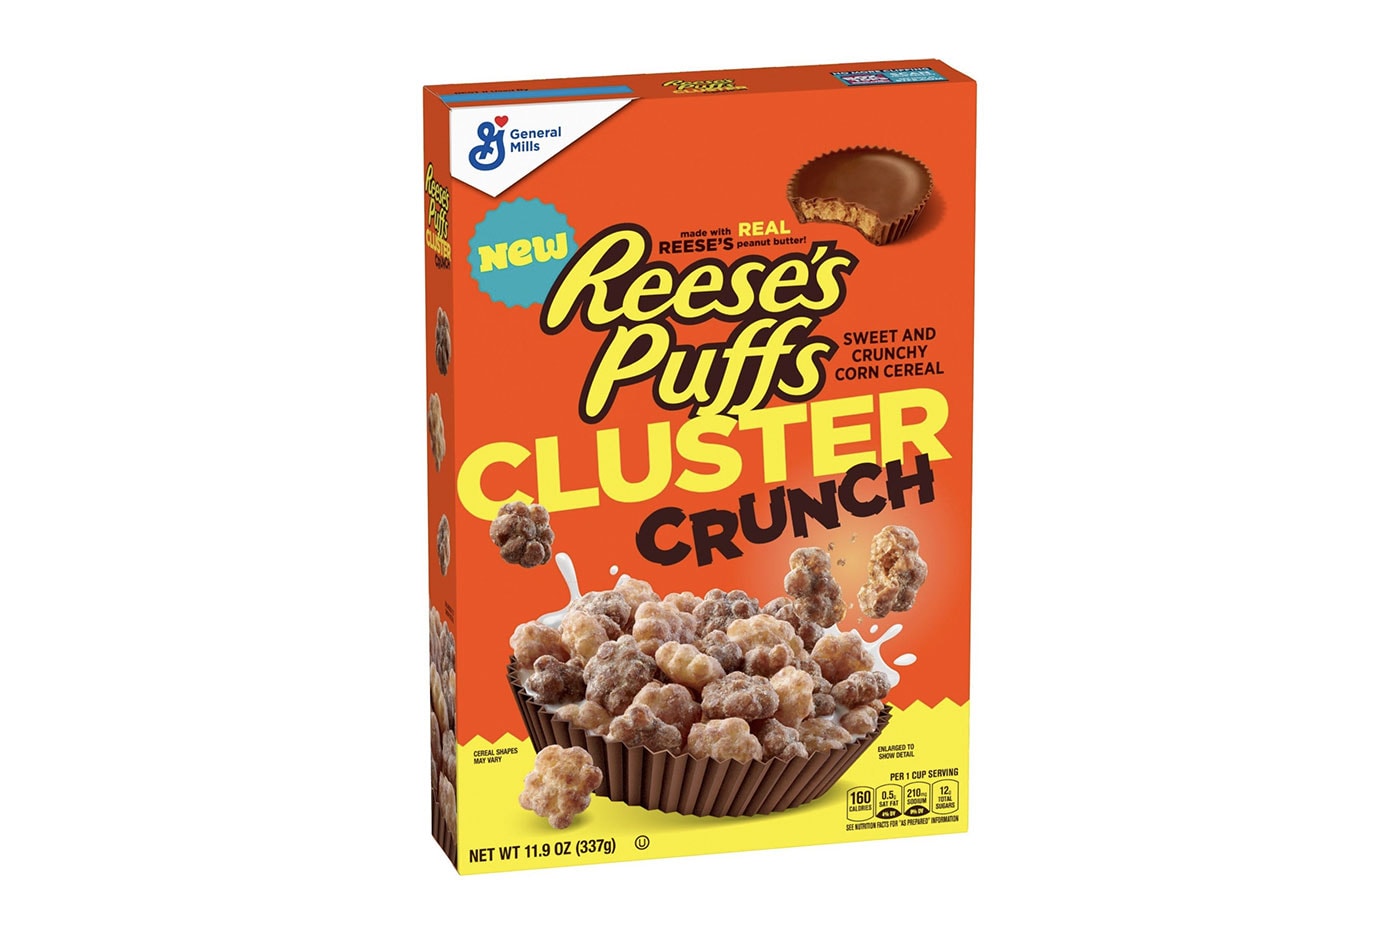 Reese's Puffs New Cluster Crunch Cereal Launch info General Mills breakfast